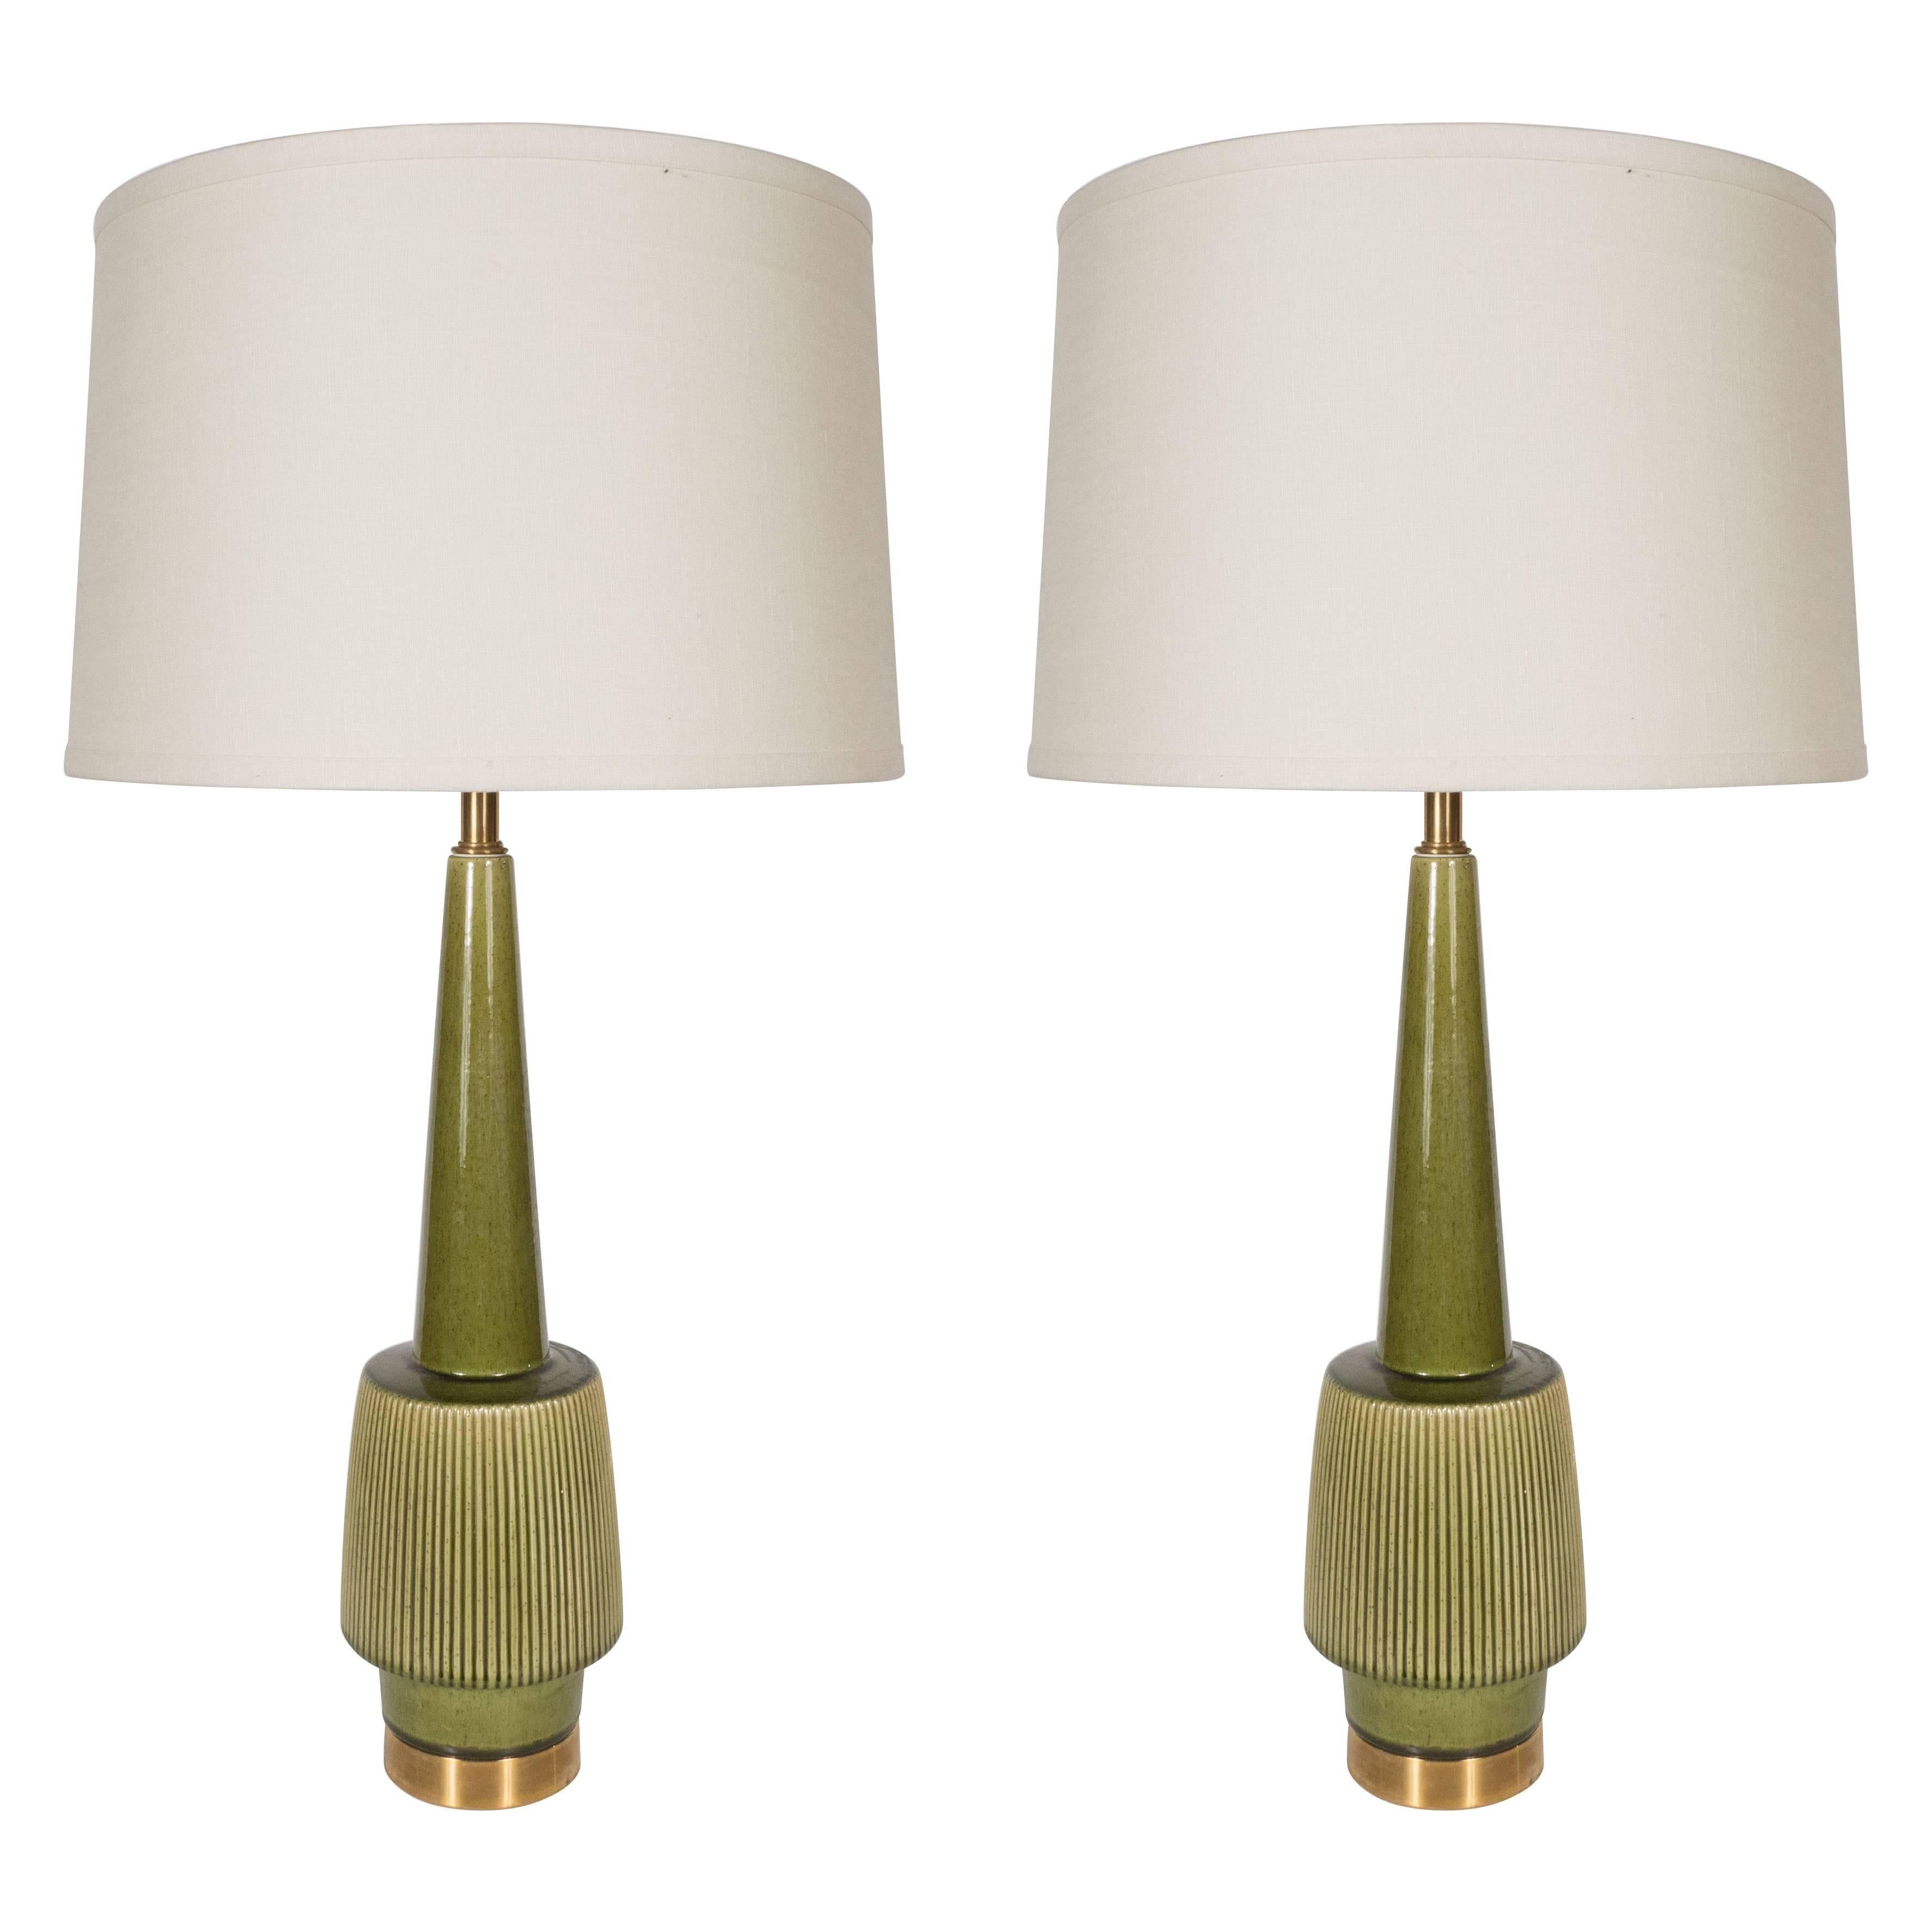 Pair of Mid-Century Modern Glazed Green Olive Ceramic and Brass Table Lamps